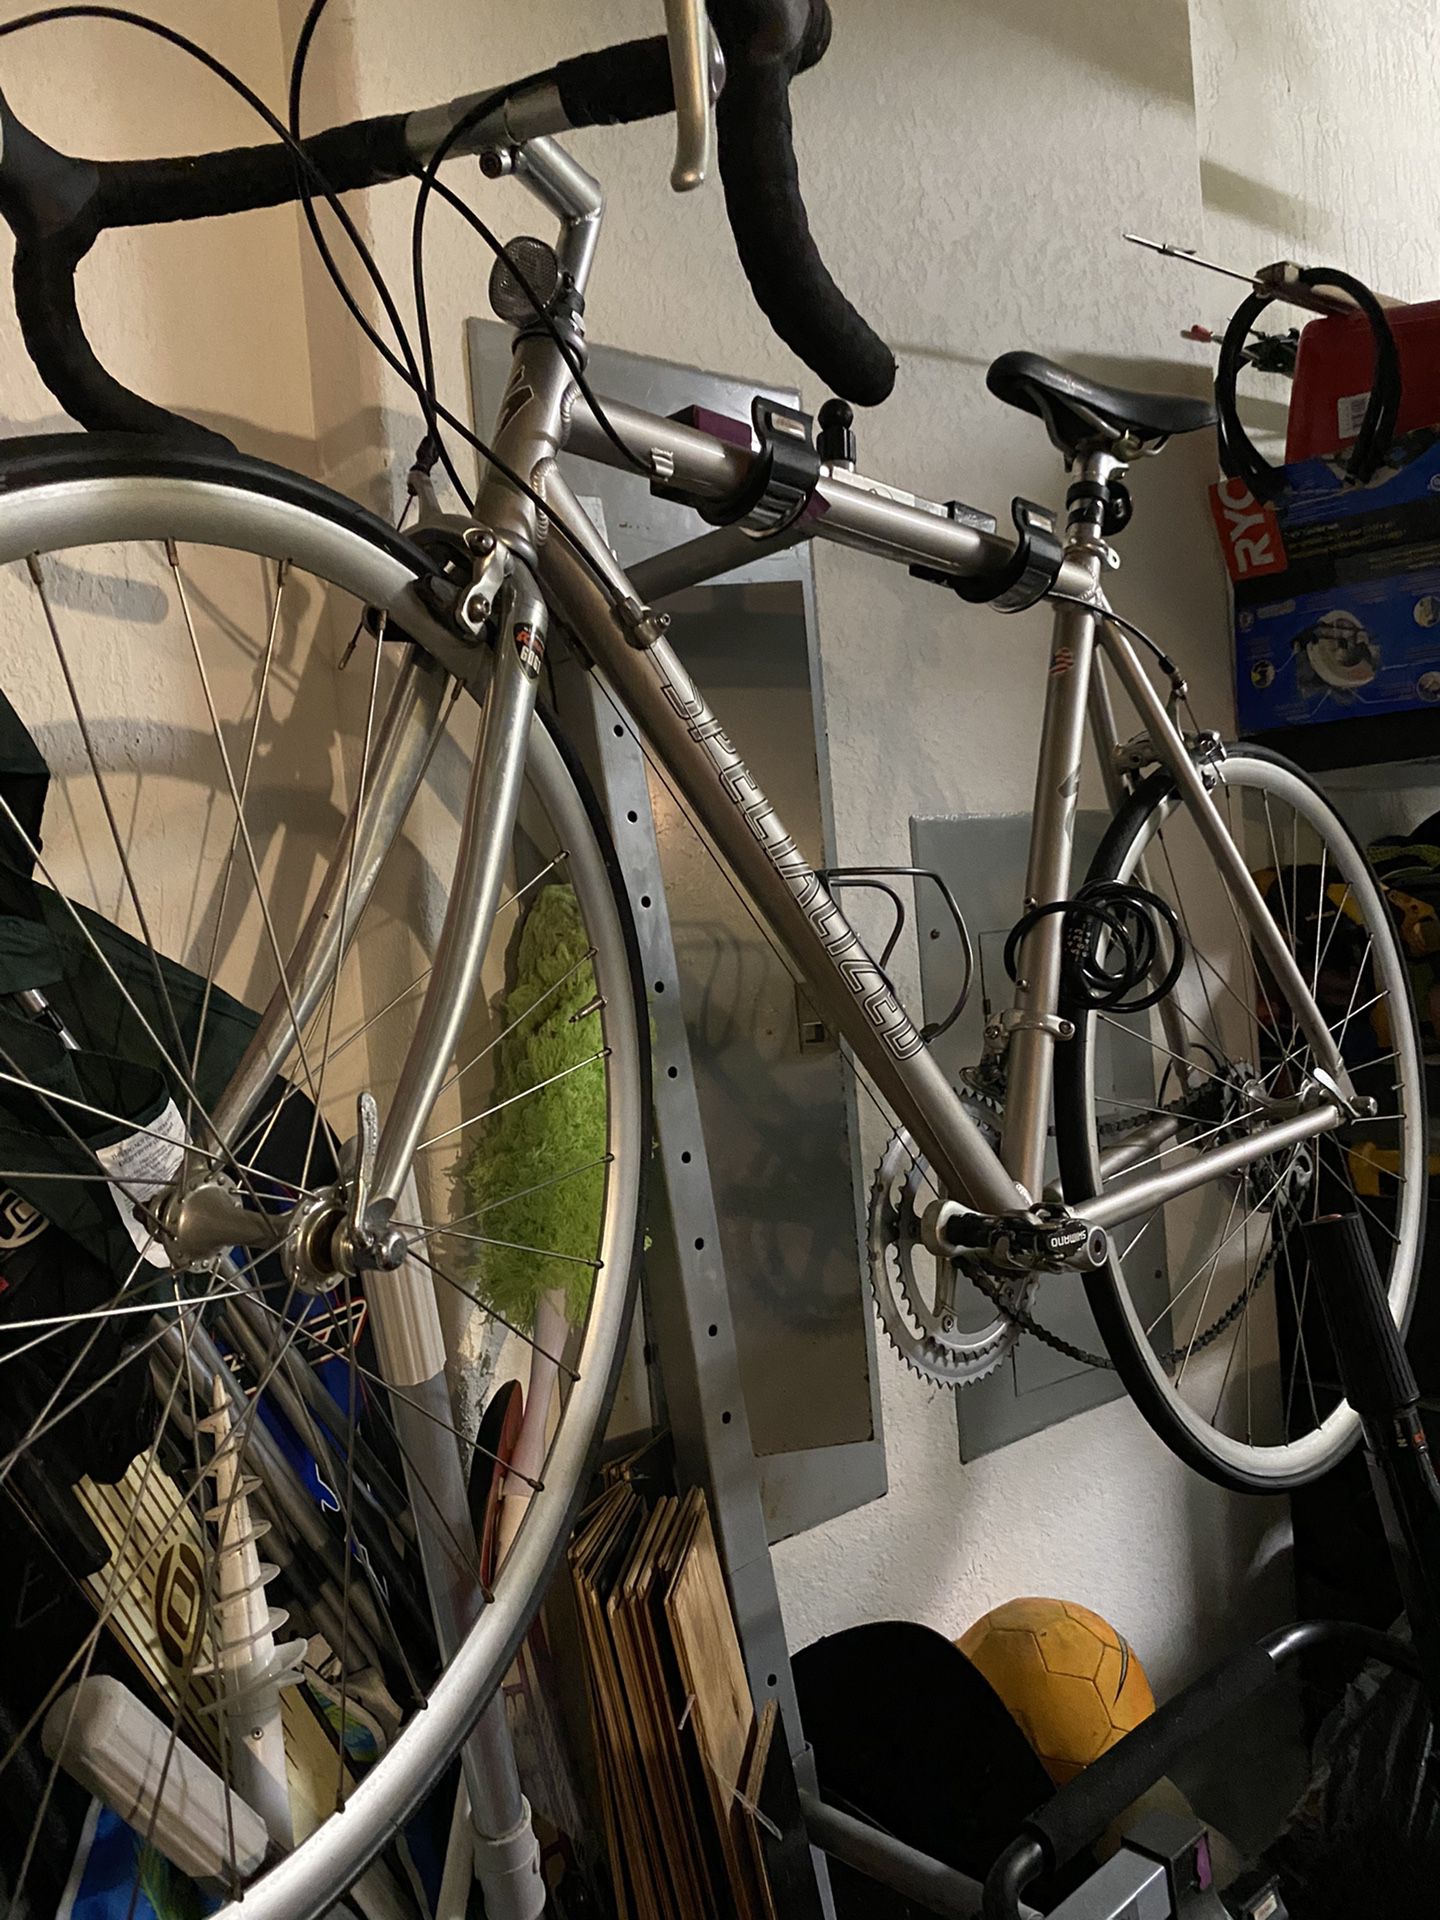 1997 classic specialized road bike in good condition. Except for one broken spoke.